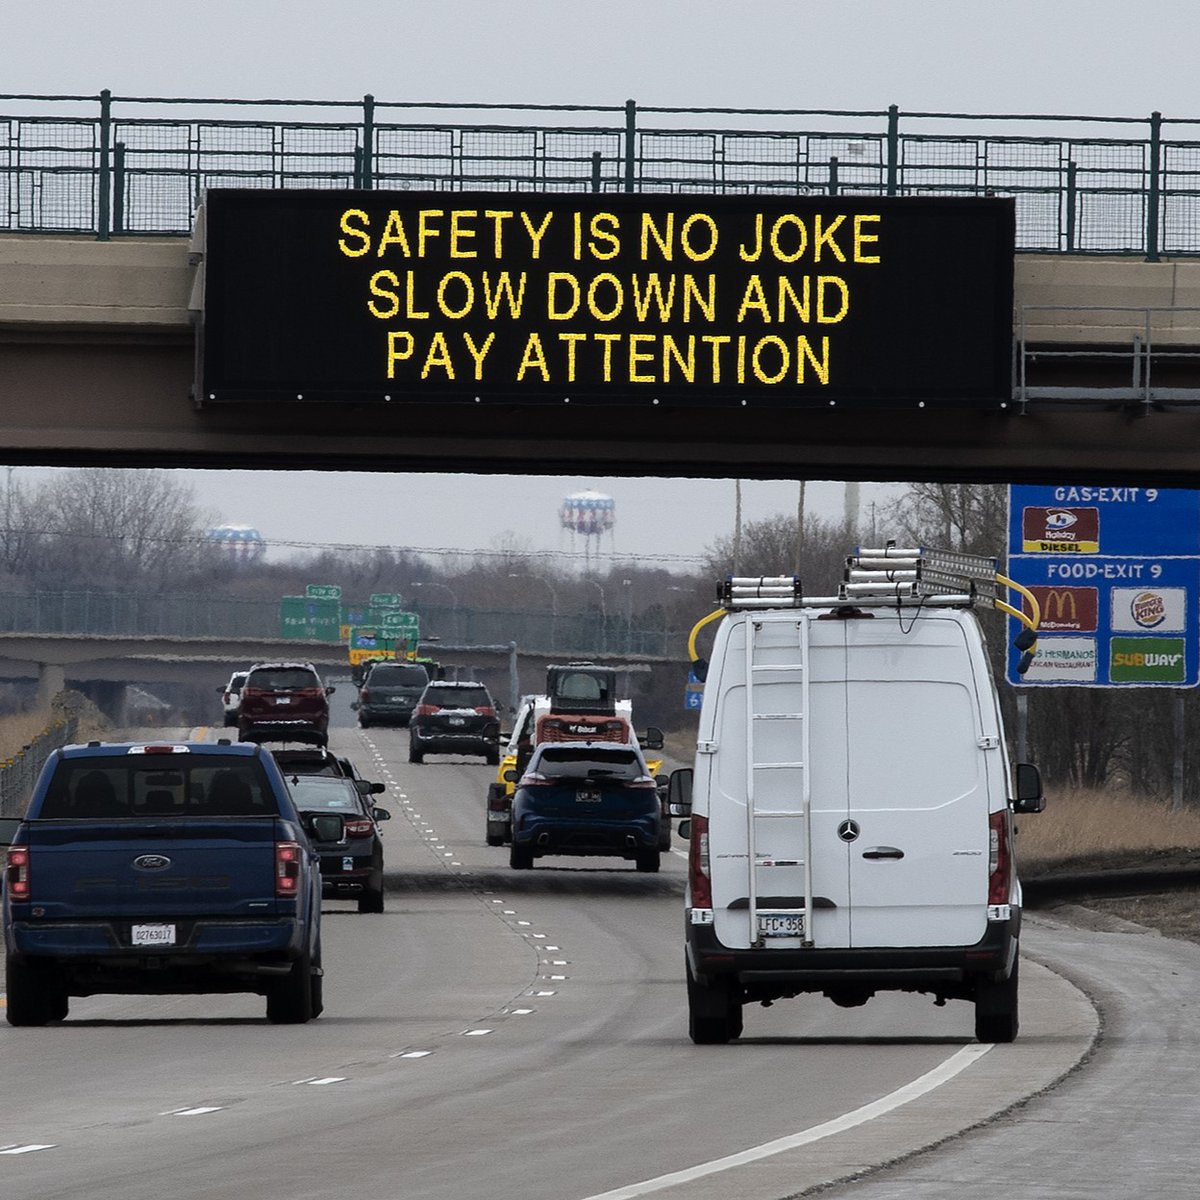 April Fools’ Day is here, but road safety is no joke. Drive safely—stay alert and take it slow.